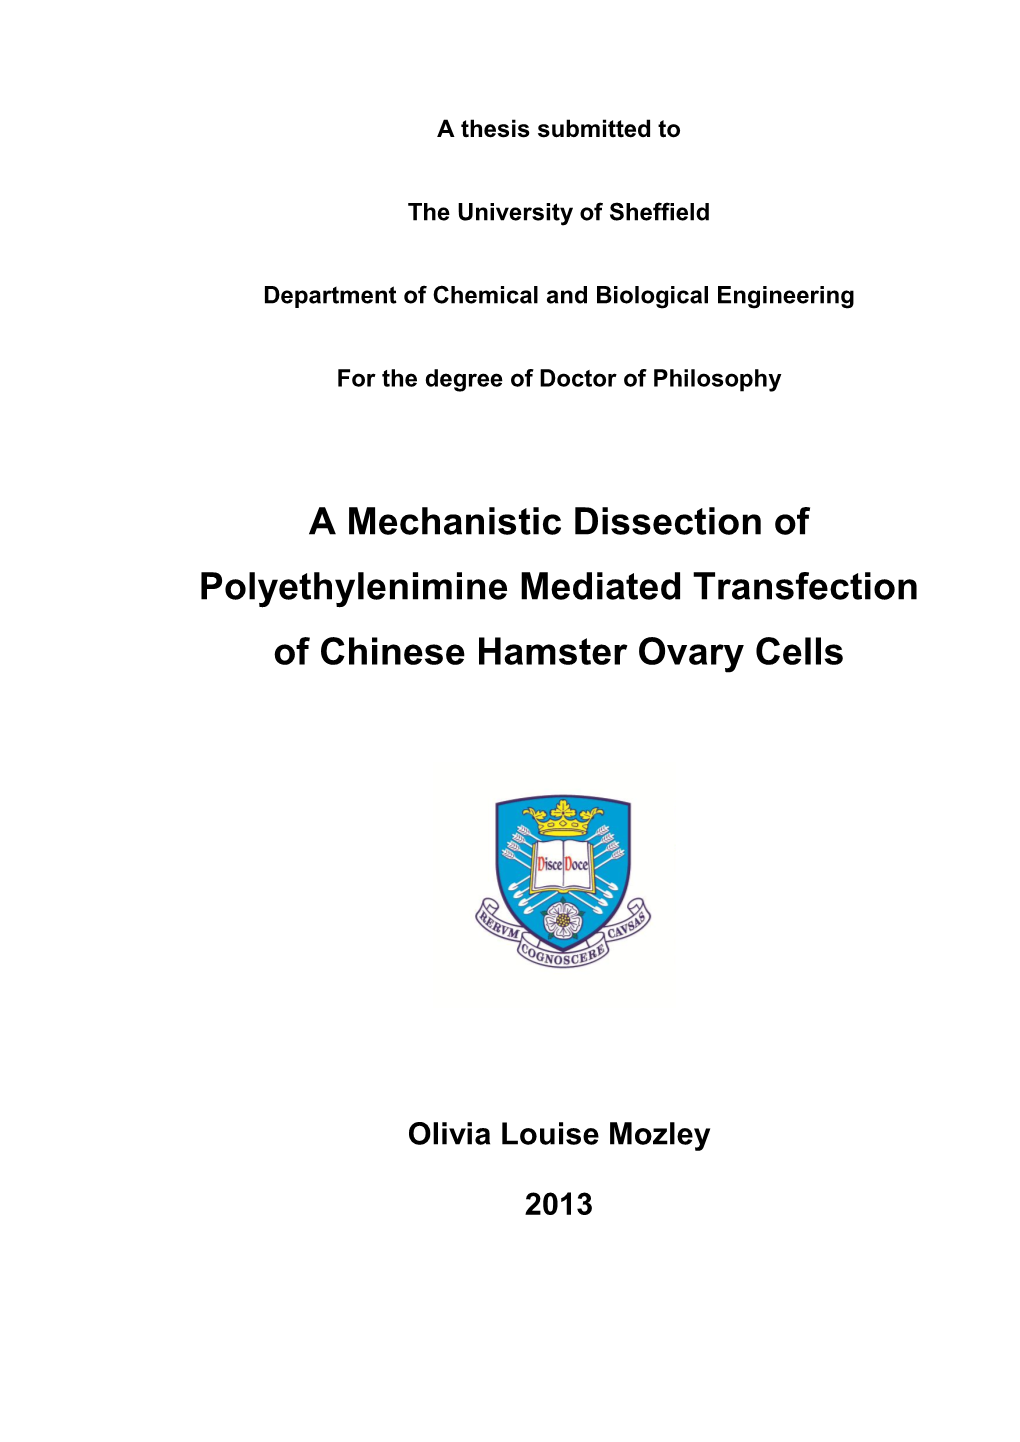 A Mechanistic Dissection of Polyethylenimine Mediated Transfection of Chinese Hamster Ovary Cells